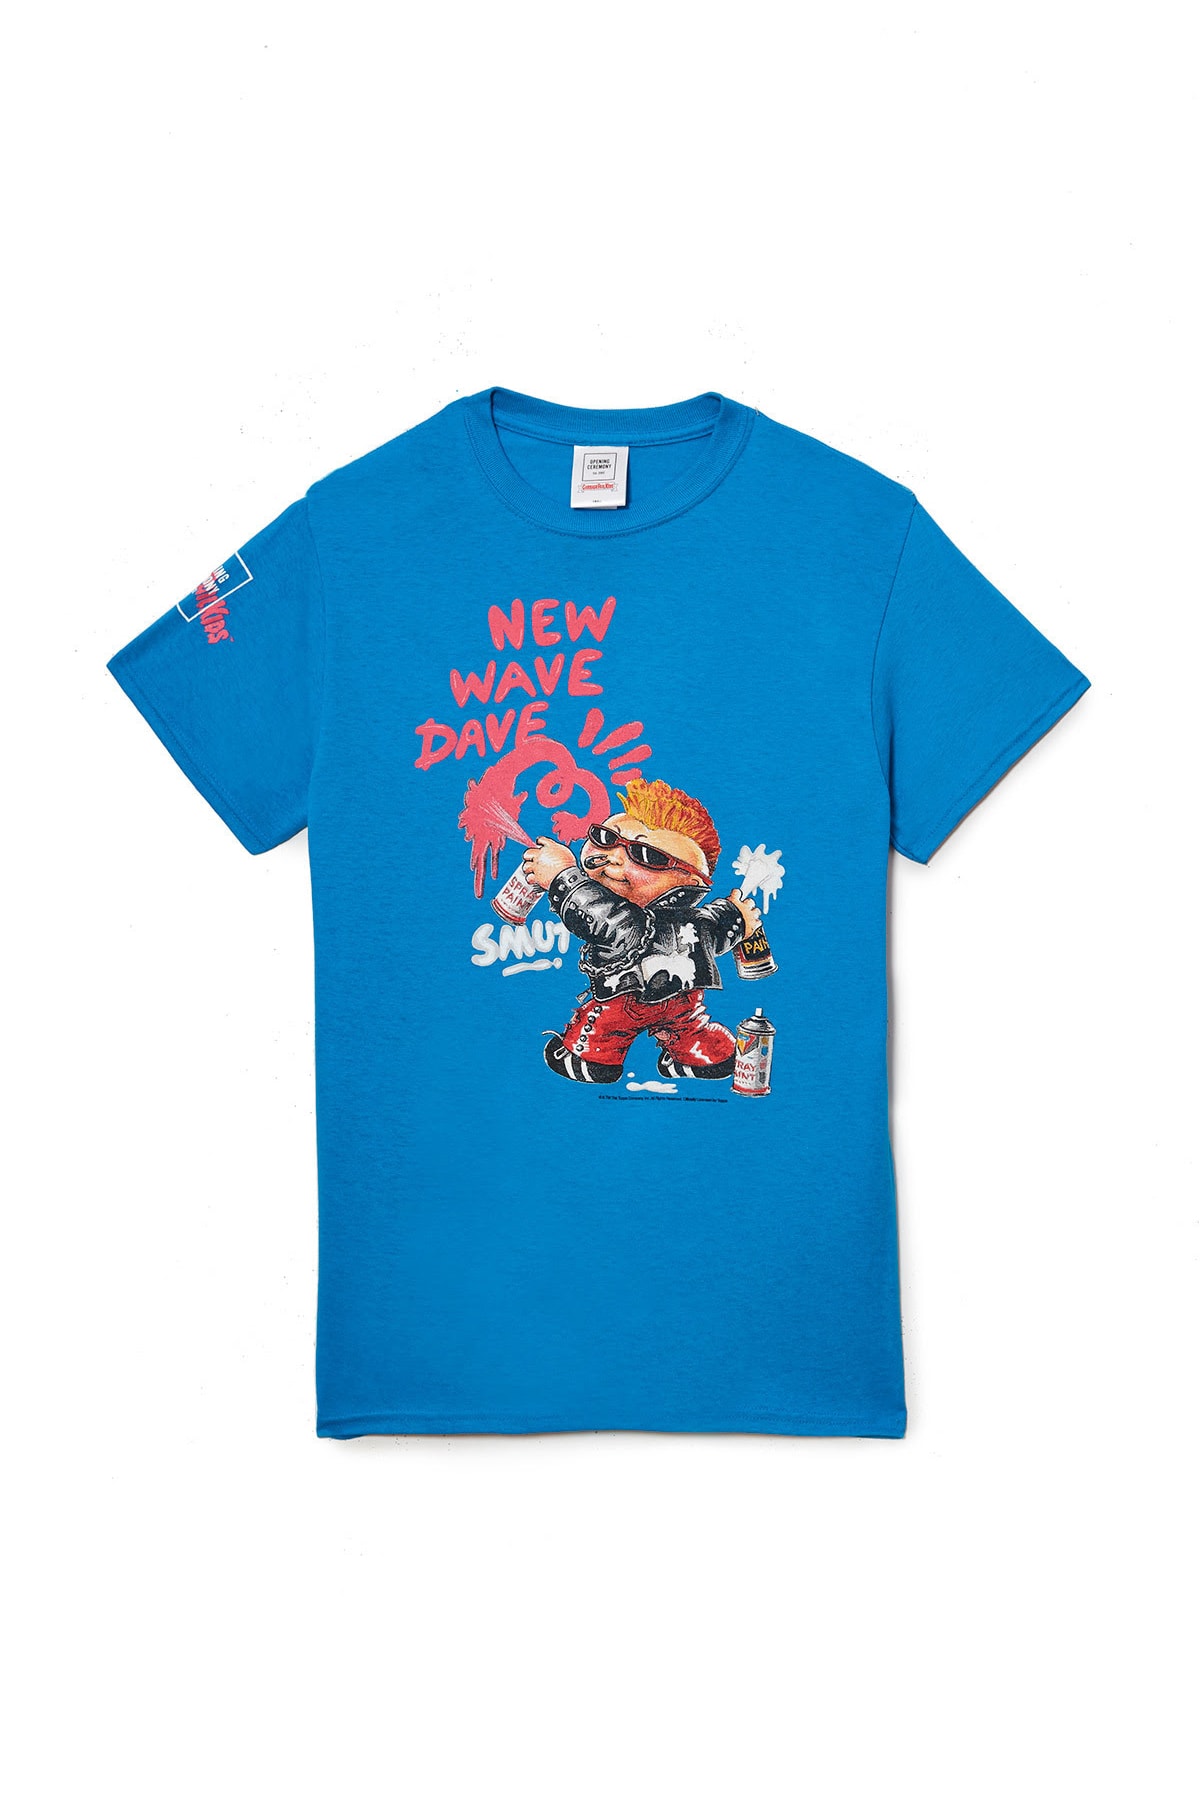 Opening Ceremony garbage pail kids collaboration tee shirt hoodie graphic print july 24 2018 drop release date info buy purchase sale